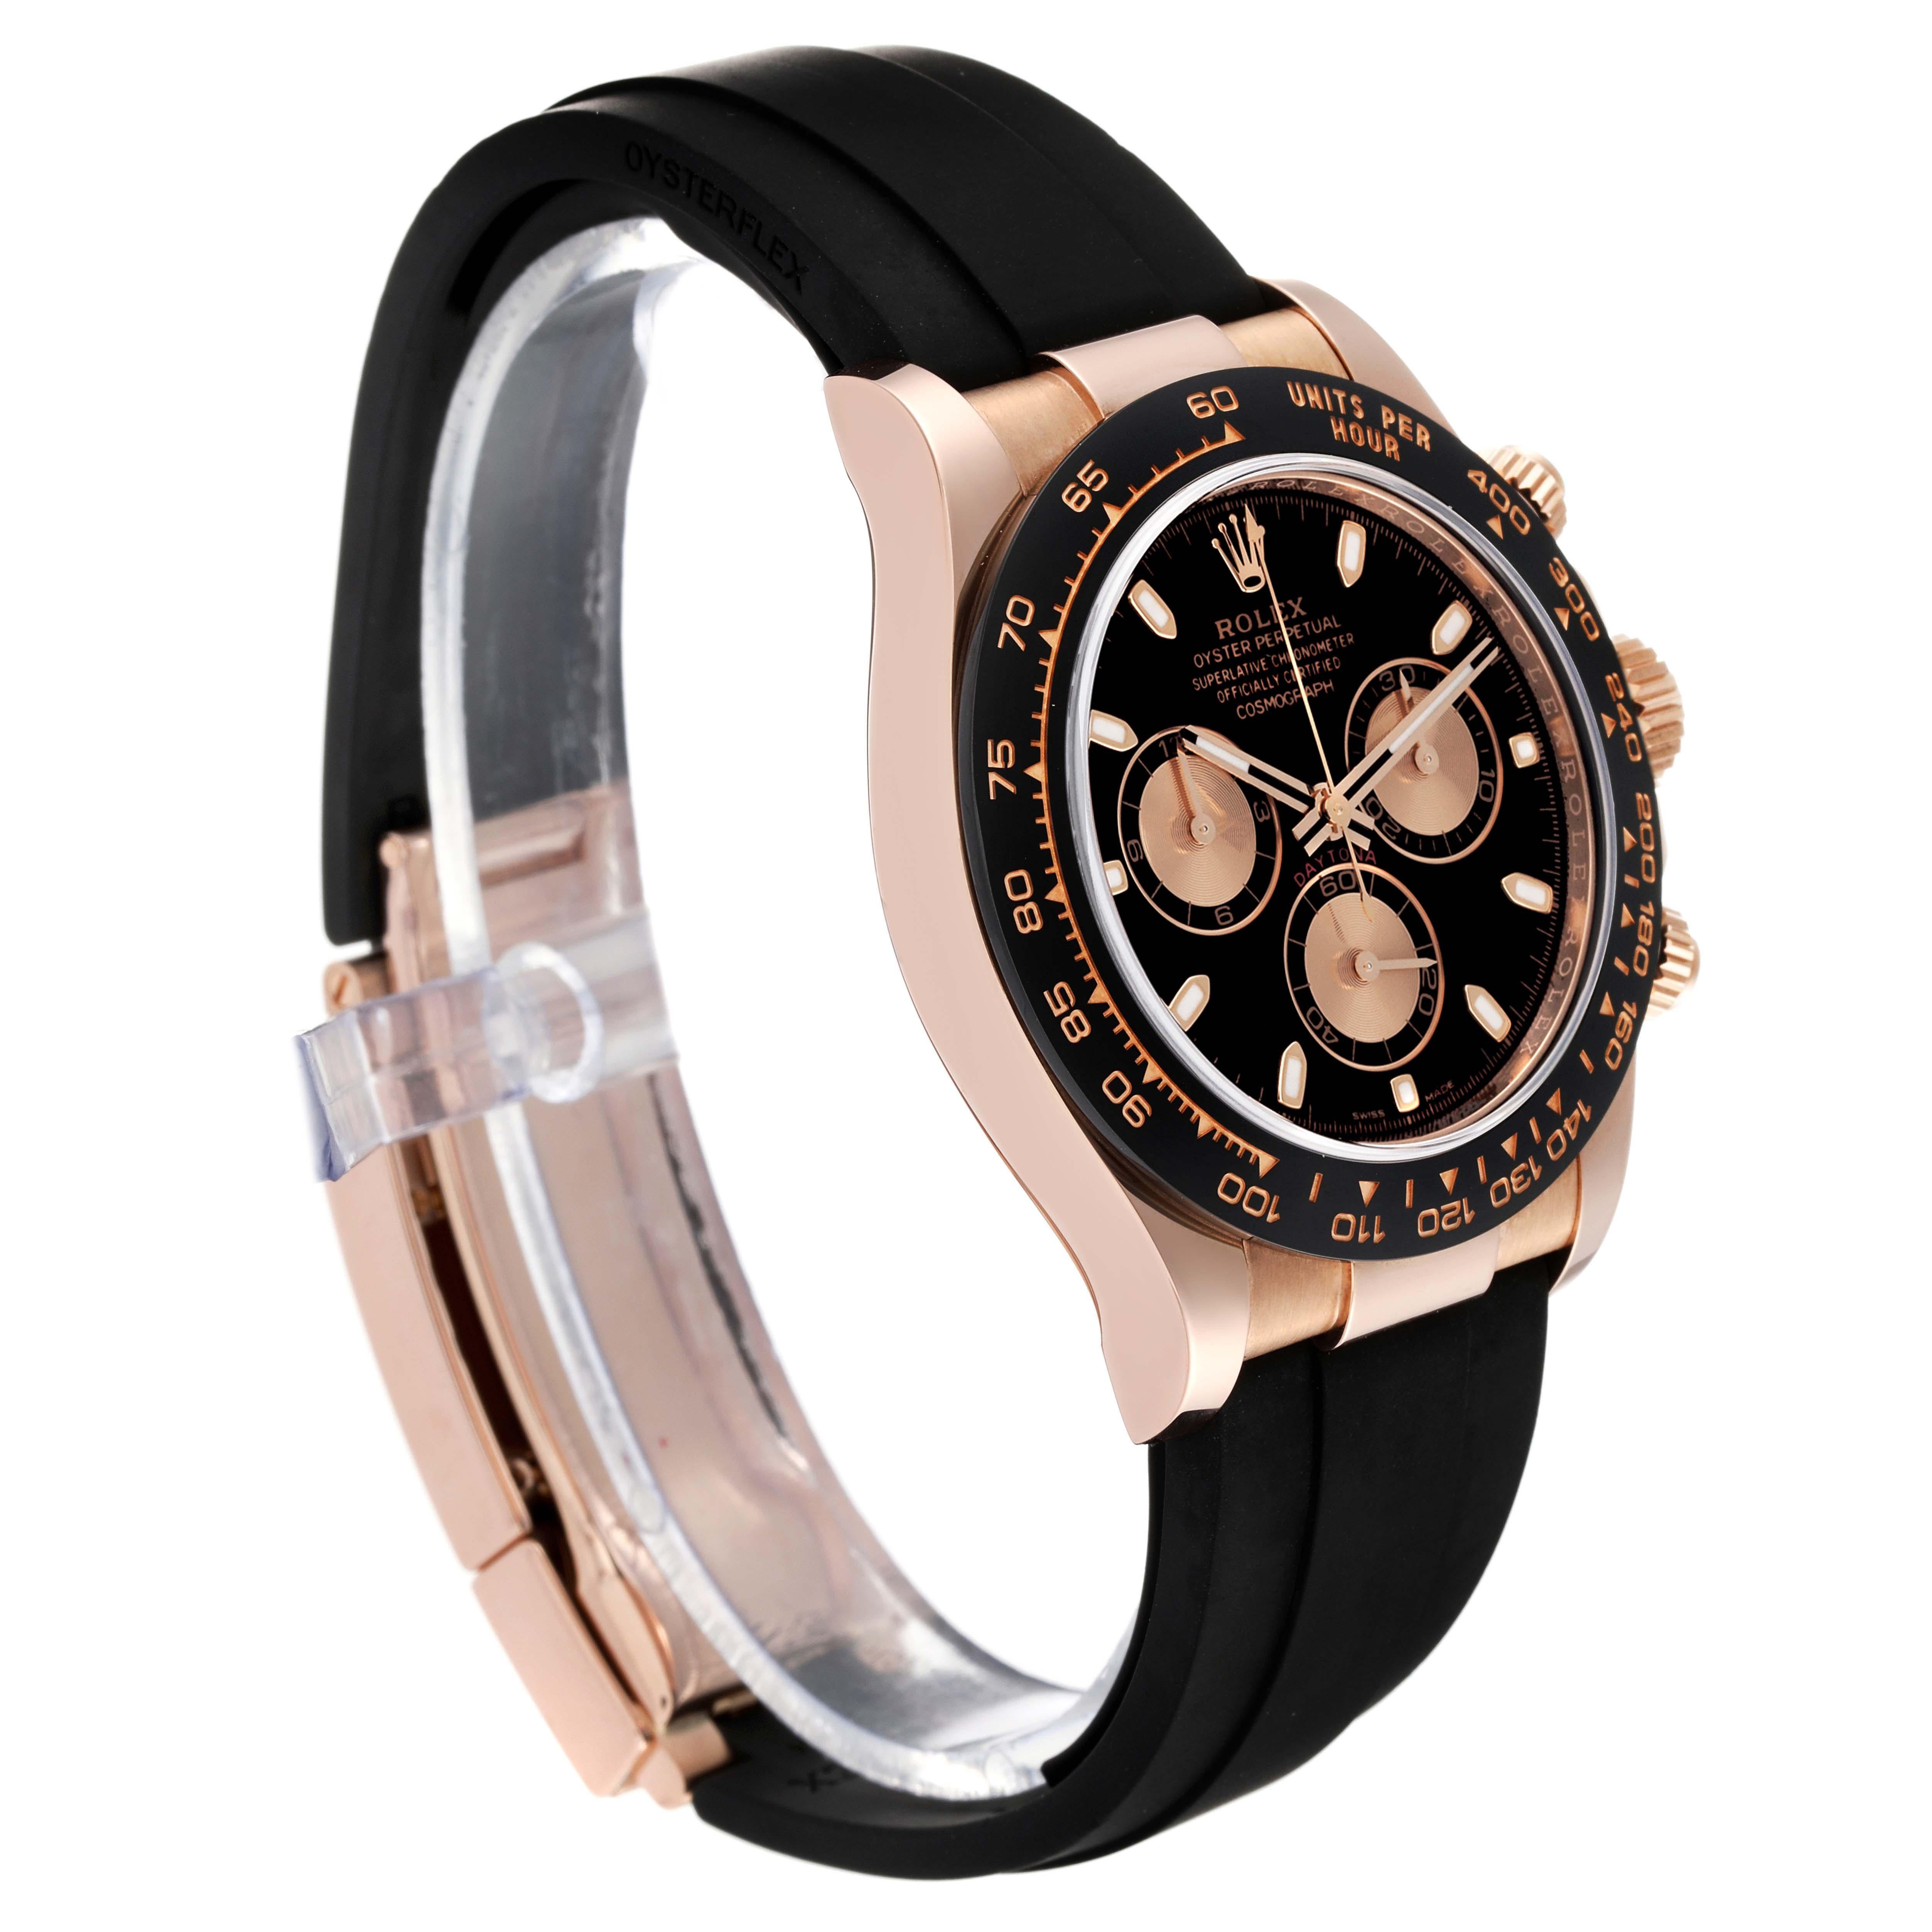 Rolex Cosmograph Daytona Rose Gold Mens Watch 116515 Box Card In Excellent Condition For Sale In Atlanta, GA